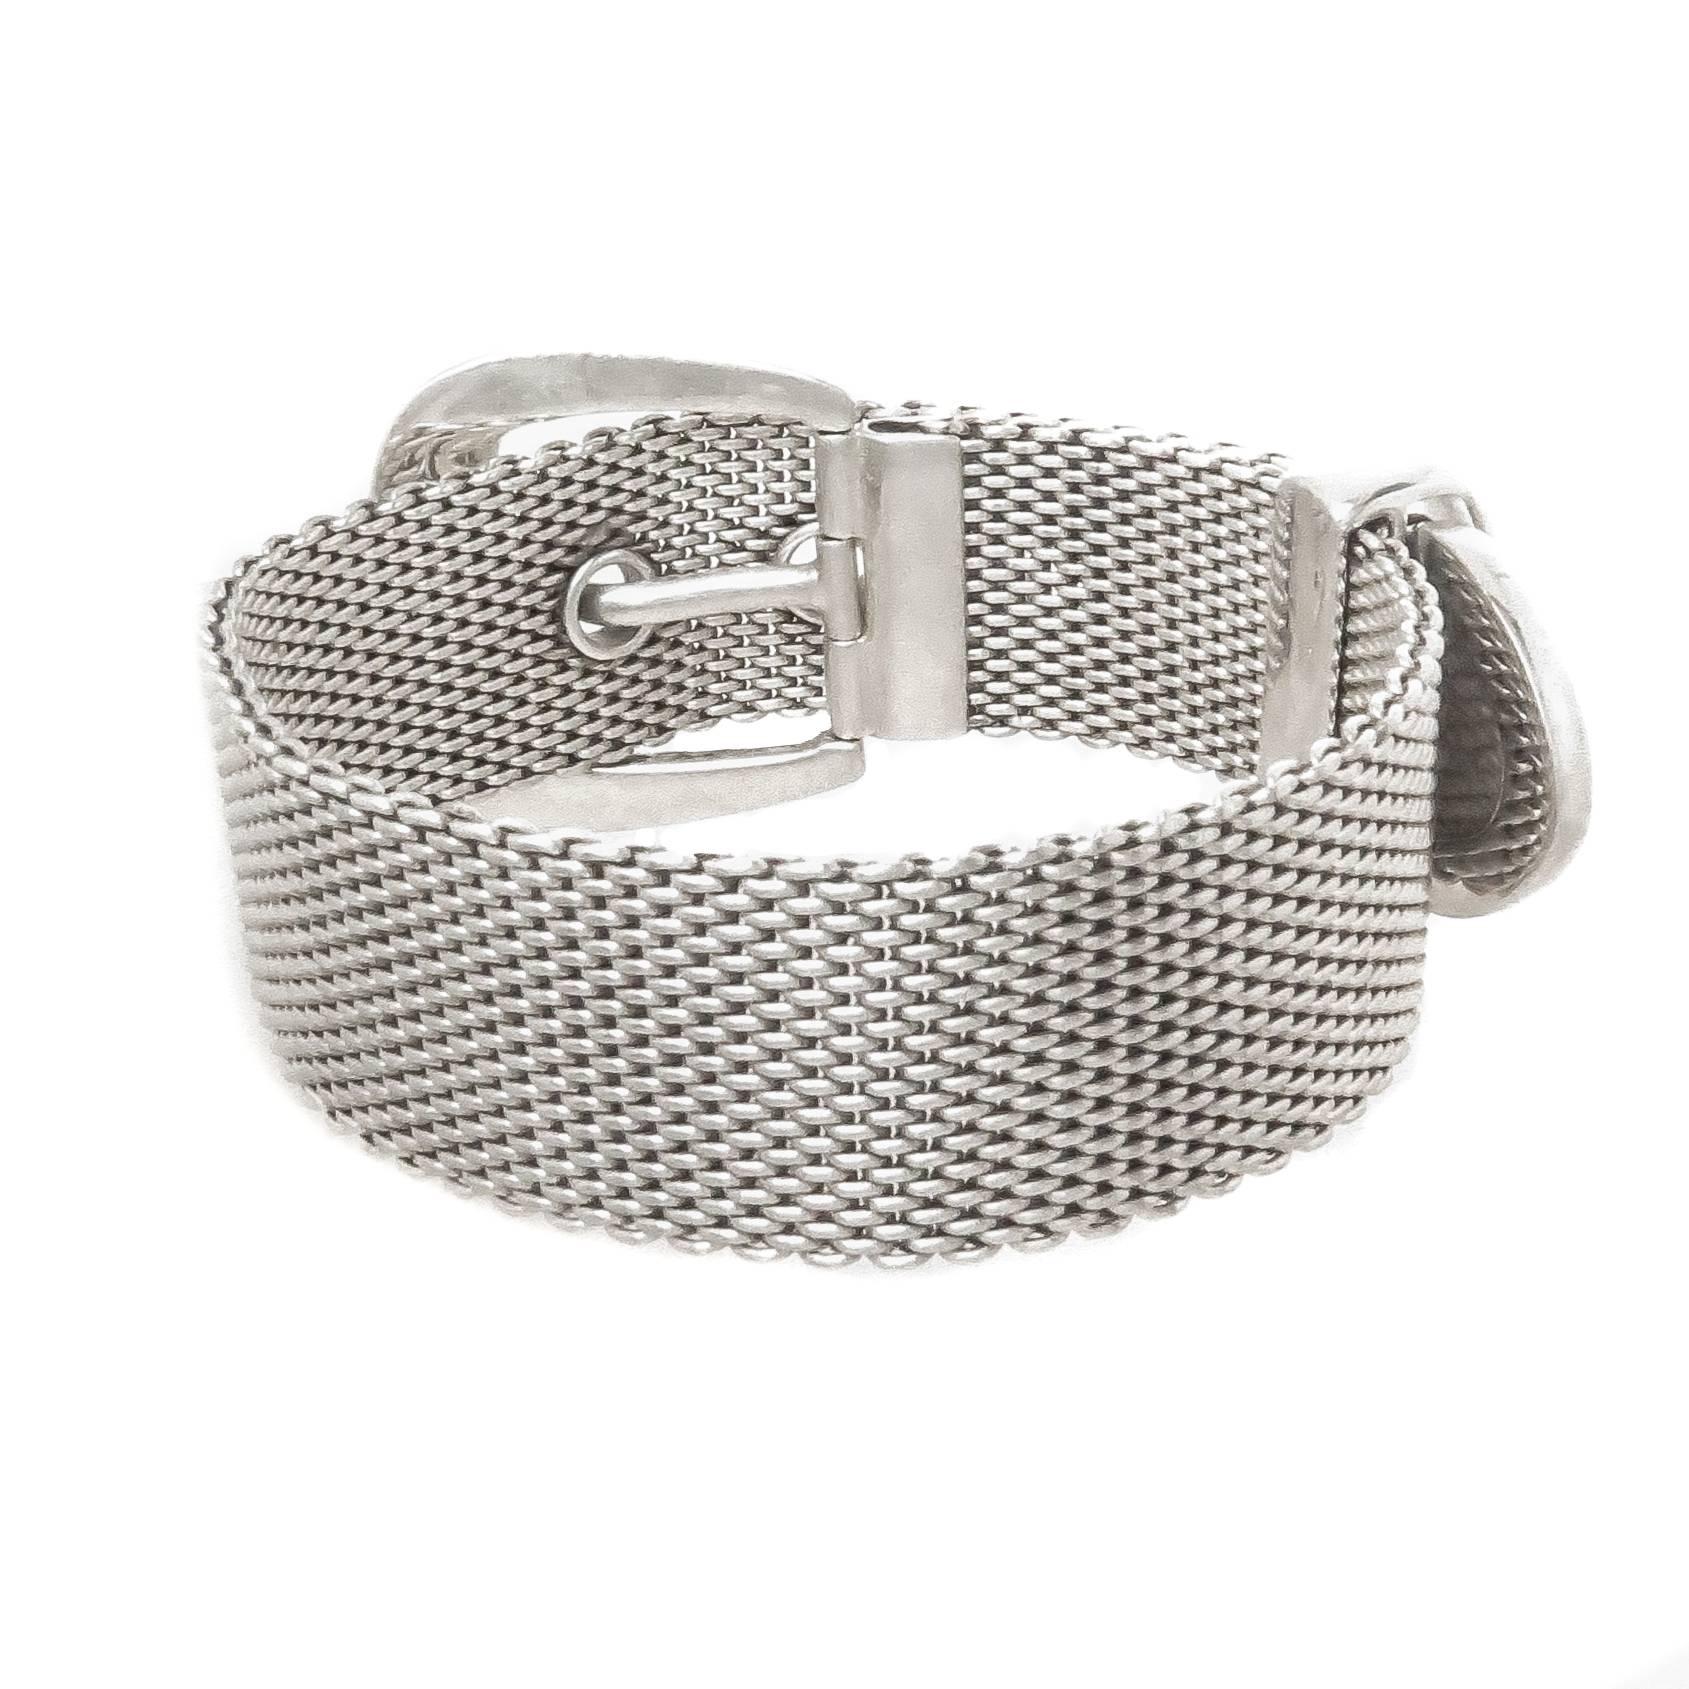 Circa 1990s Ralph Lauren Sterling Silver Mesh link Buckle Bracelet, measuring 9 3/4 inches in length and 3/4 inch wide. Very finely made and having a very soft and flexible mesh. 